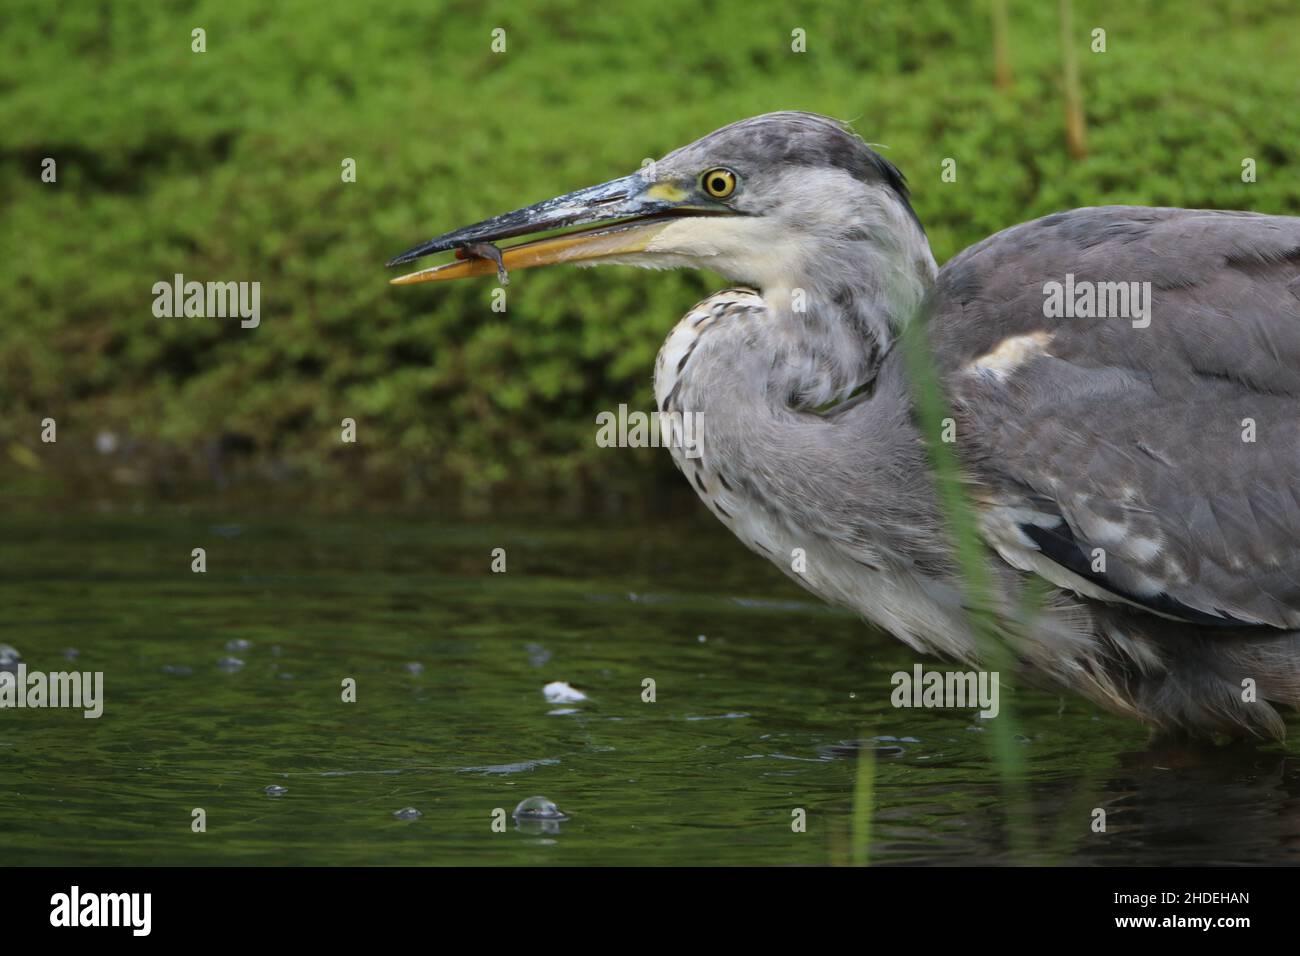 Grey herons will take prey of different sizes, from sticklebacks to large fish.  Preening keeps feathers in tip top condition. Stock Photo